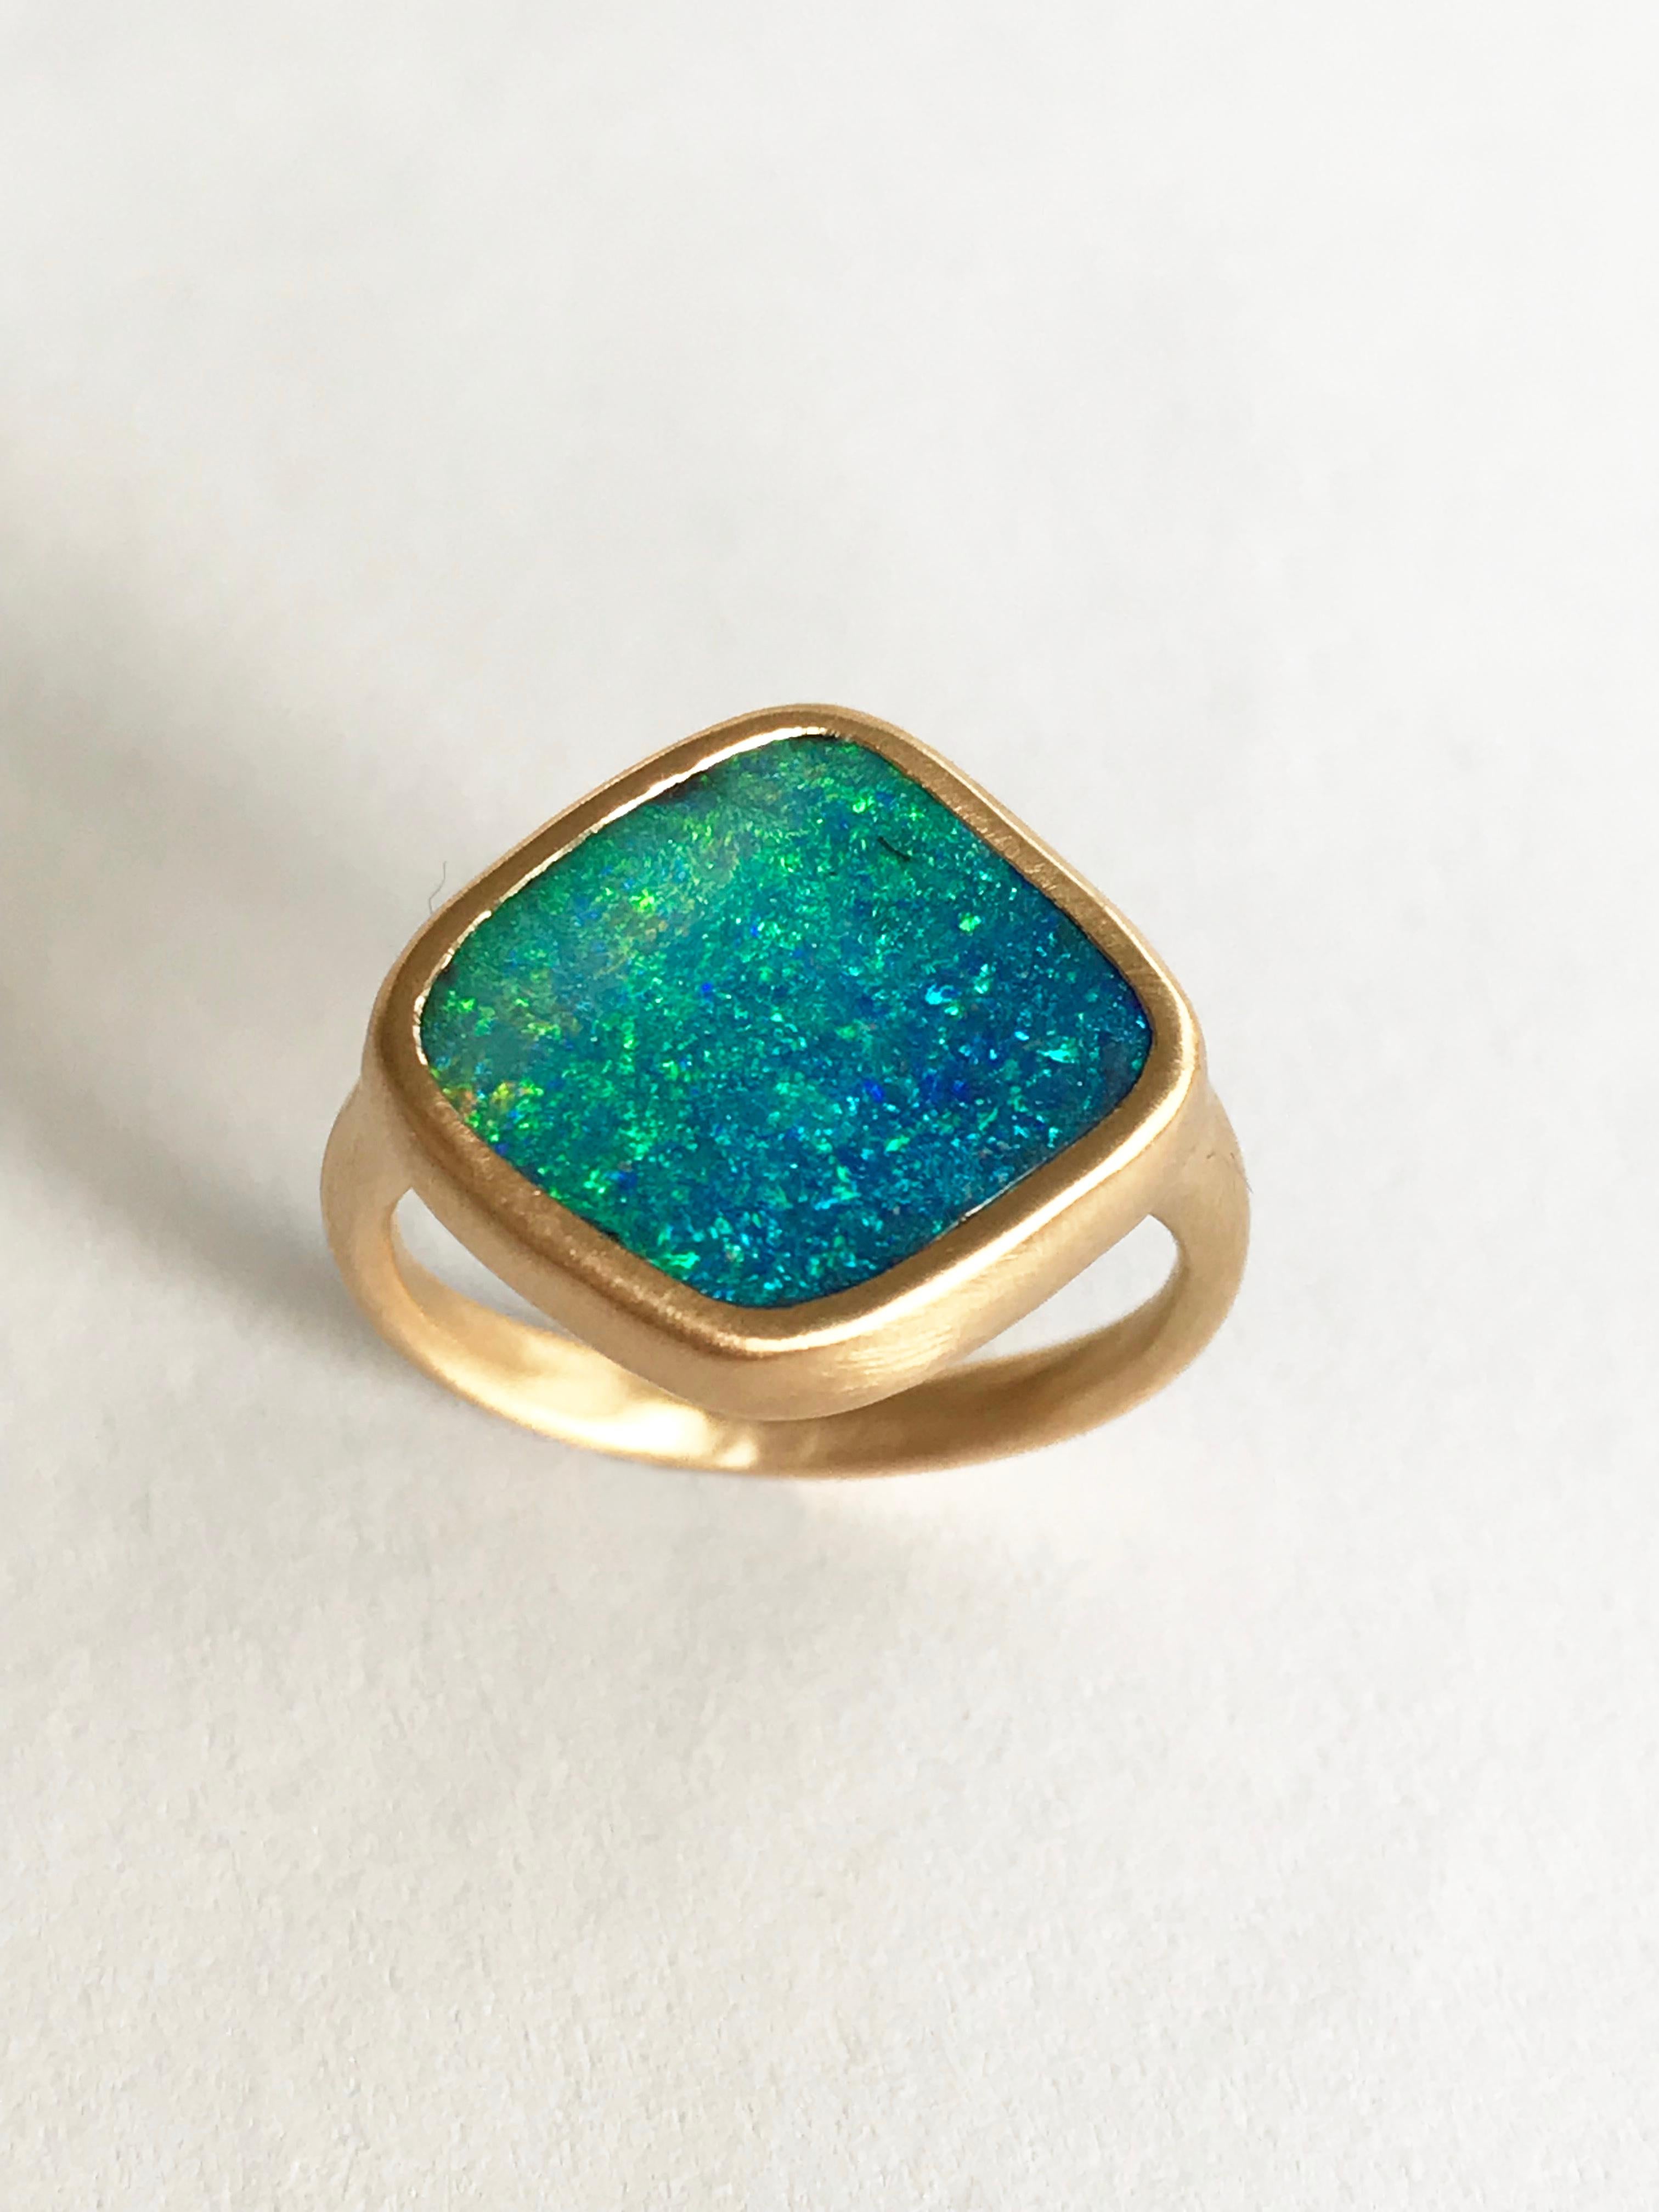 Dalben Blue Green Boulder Opal Yellow Gold Ring For Sale 2